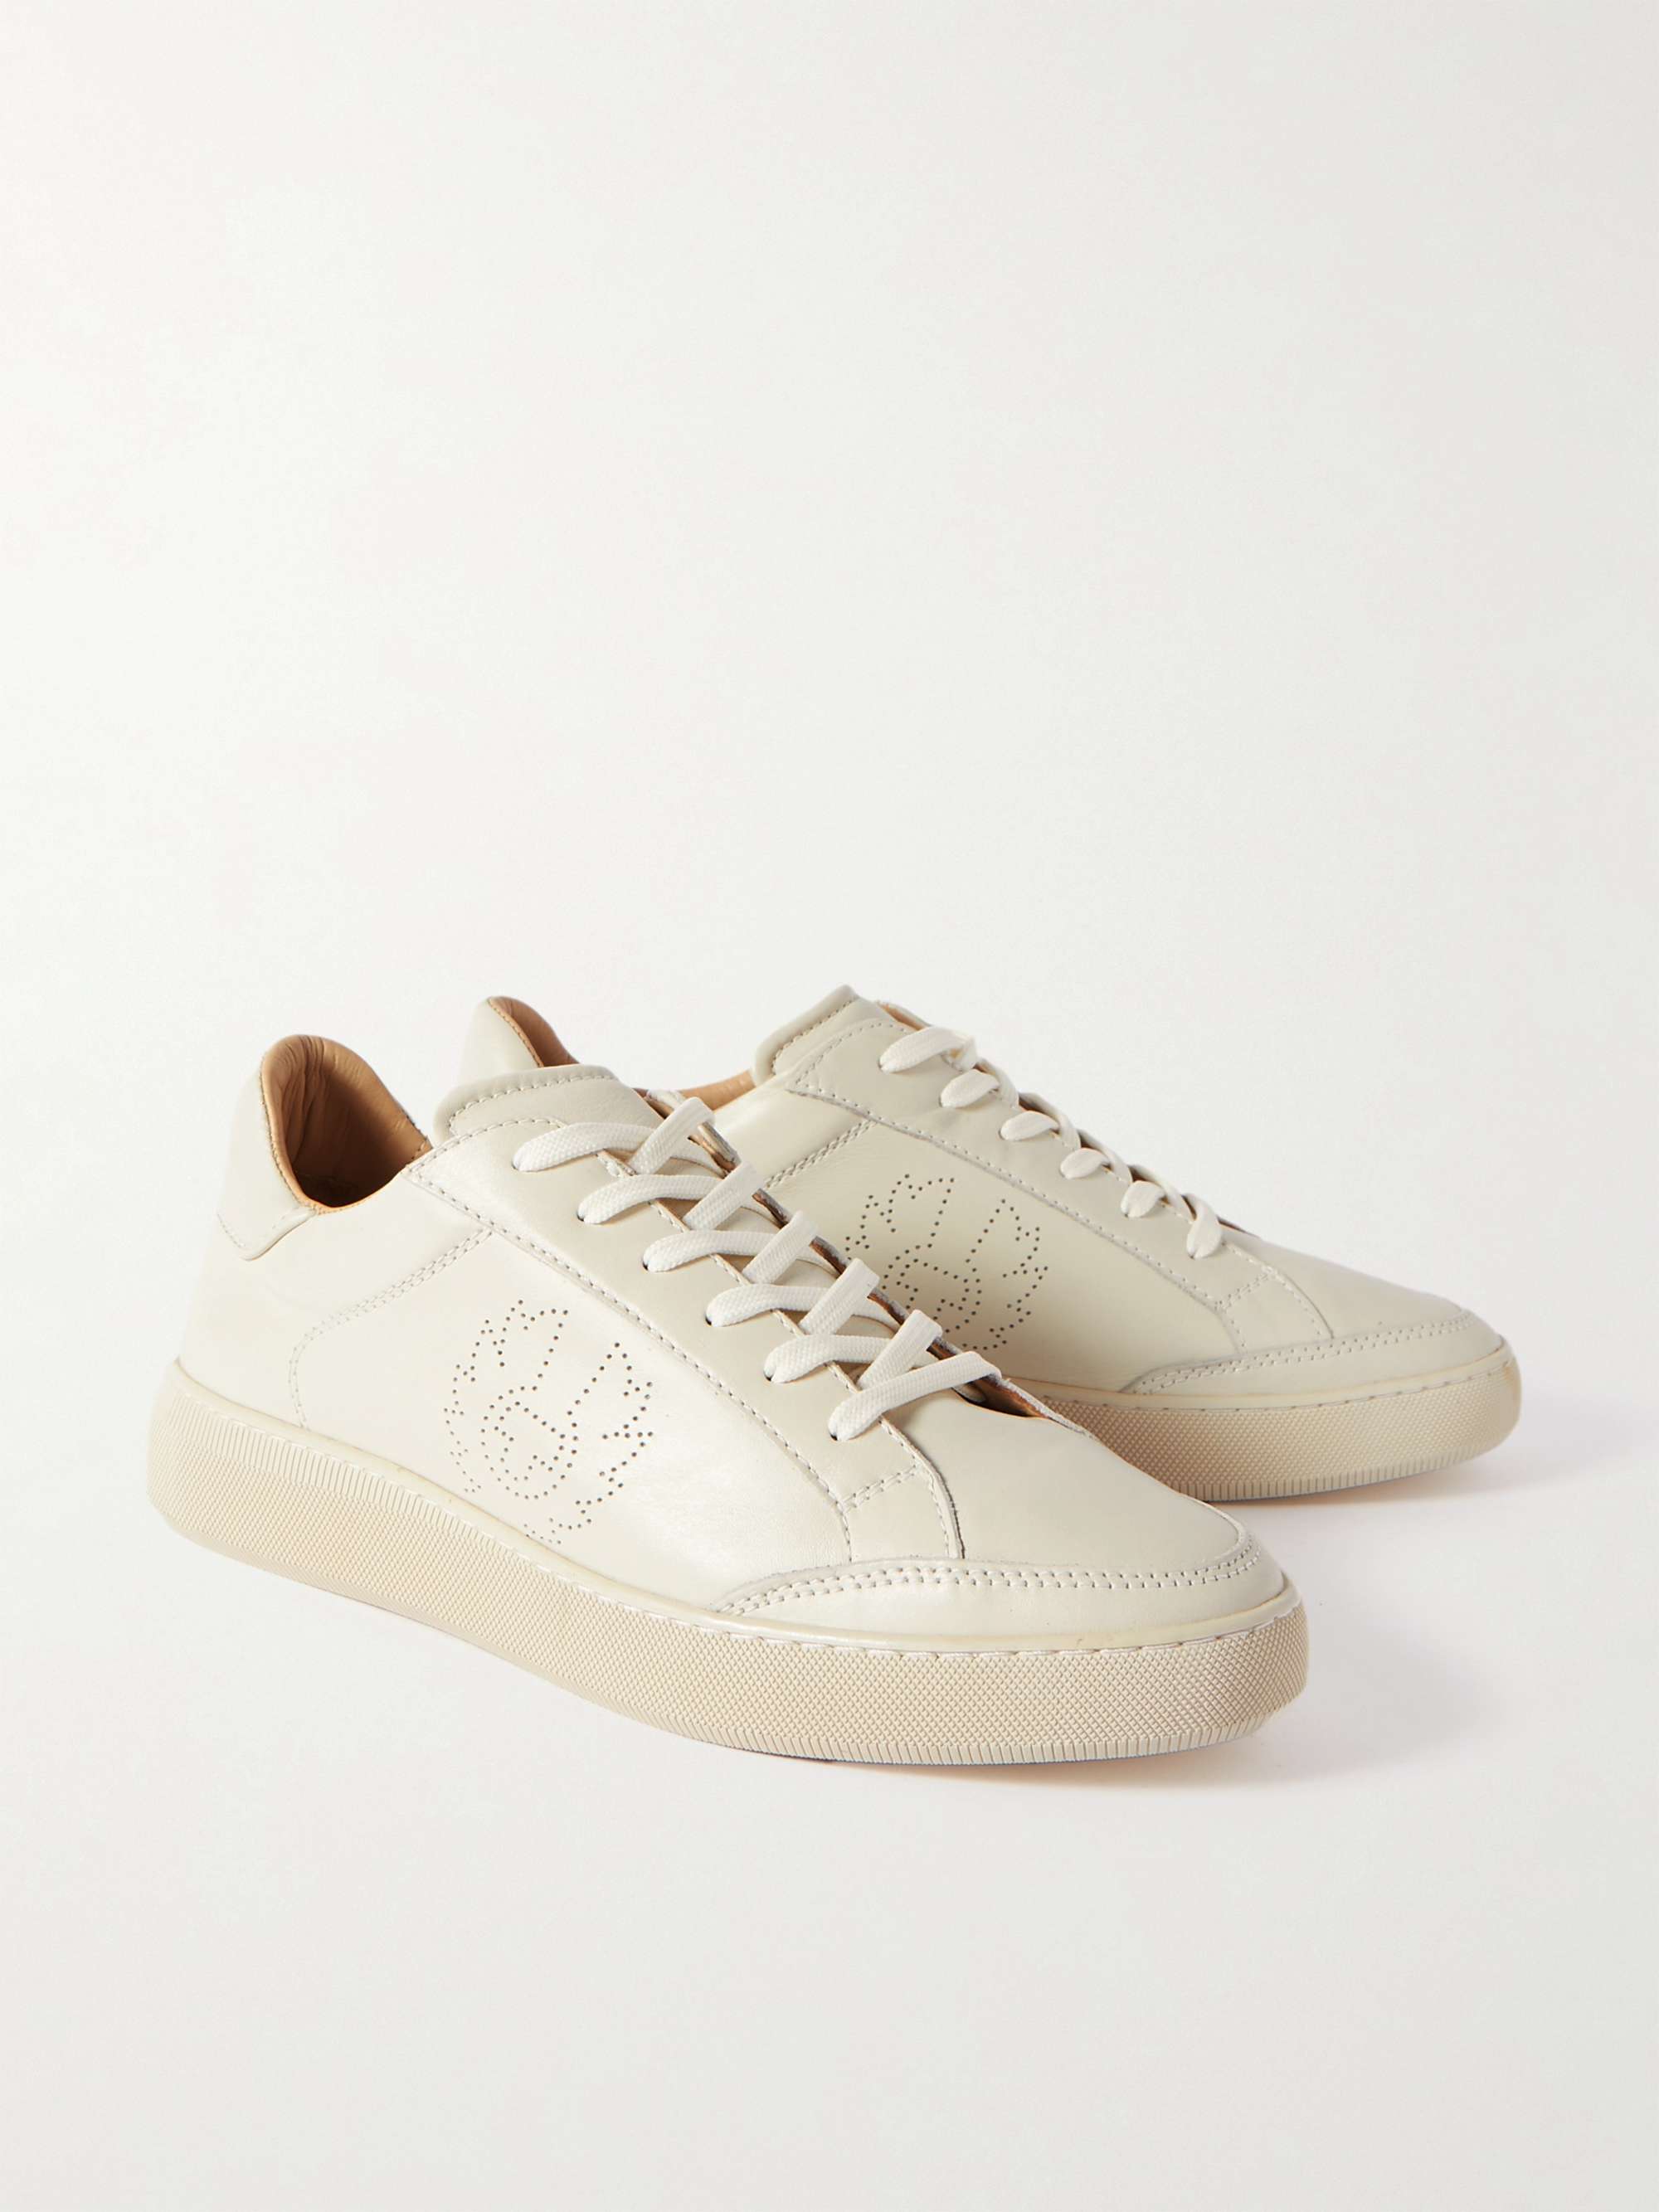 BELSTAFF Track Logo-Perforated Leather Sneakers for Men | MR PORTER